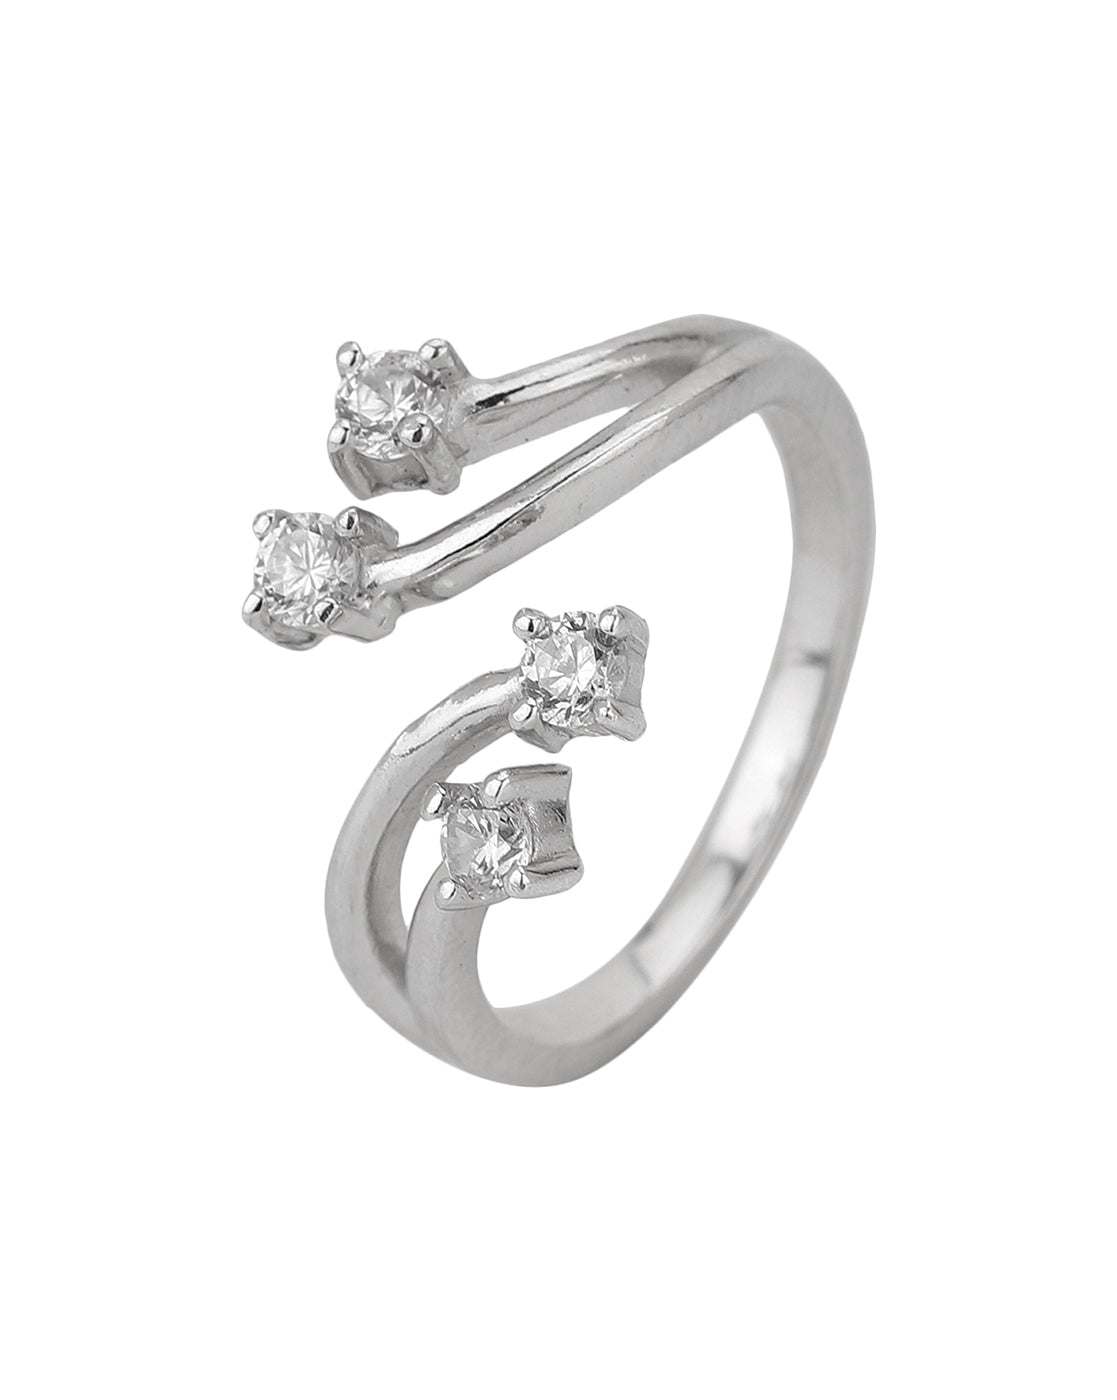 Carlton London Rhodium Plated Silver Toned Cz Studded Adjustable Contemporary Finger Ring For Women